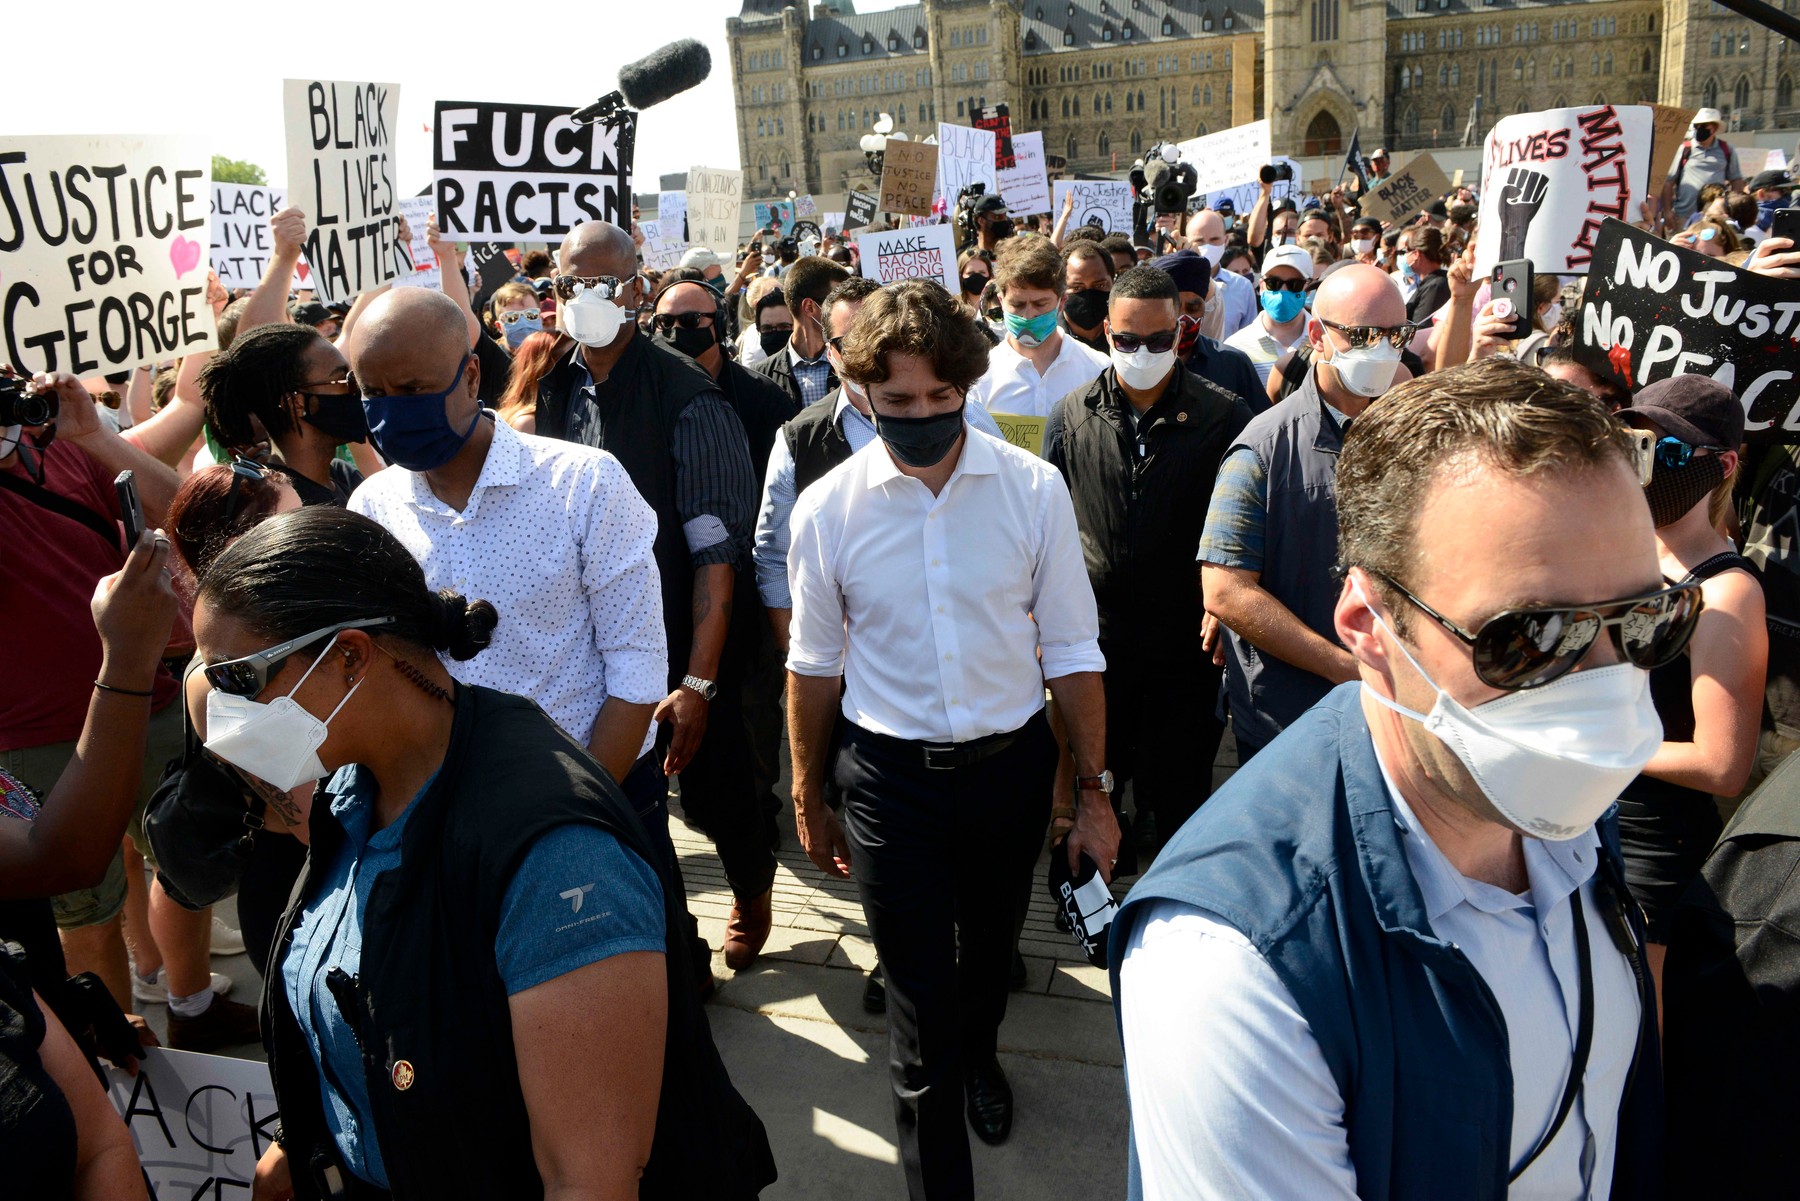 June 5, 2020, Ottawa, on, Canada: EDS NOTE PROFANE LANGUAGE Prime Minister Justin Trudeau takes part in an anti-racism protest on Parliament Hill during the COVID-19 pandemic in Ottawa on Friday, June 5, 2020.,Image: 527478248, License: Rights-managed, Restrictions: * Canada and U.S. RIGHTS OUT *, Model Release: no, Credit line: Sean Kilpatrick / Zuma Press / Profimedia